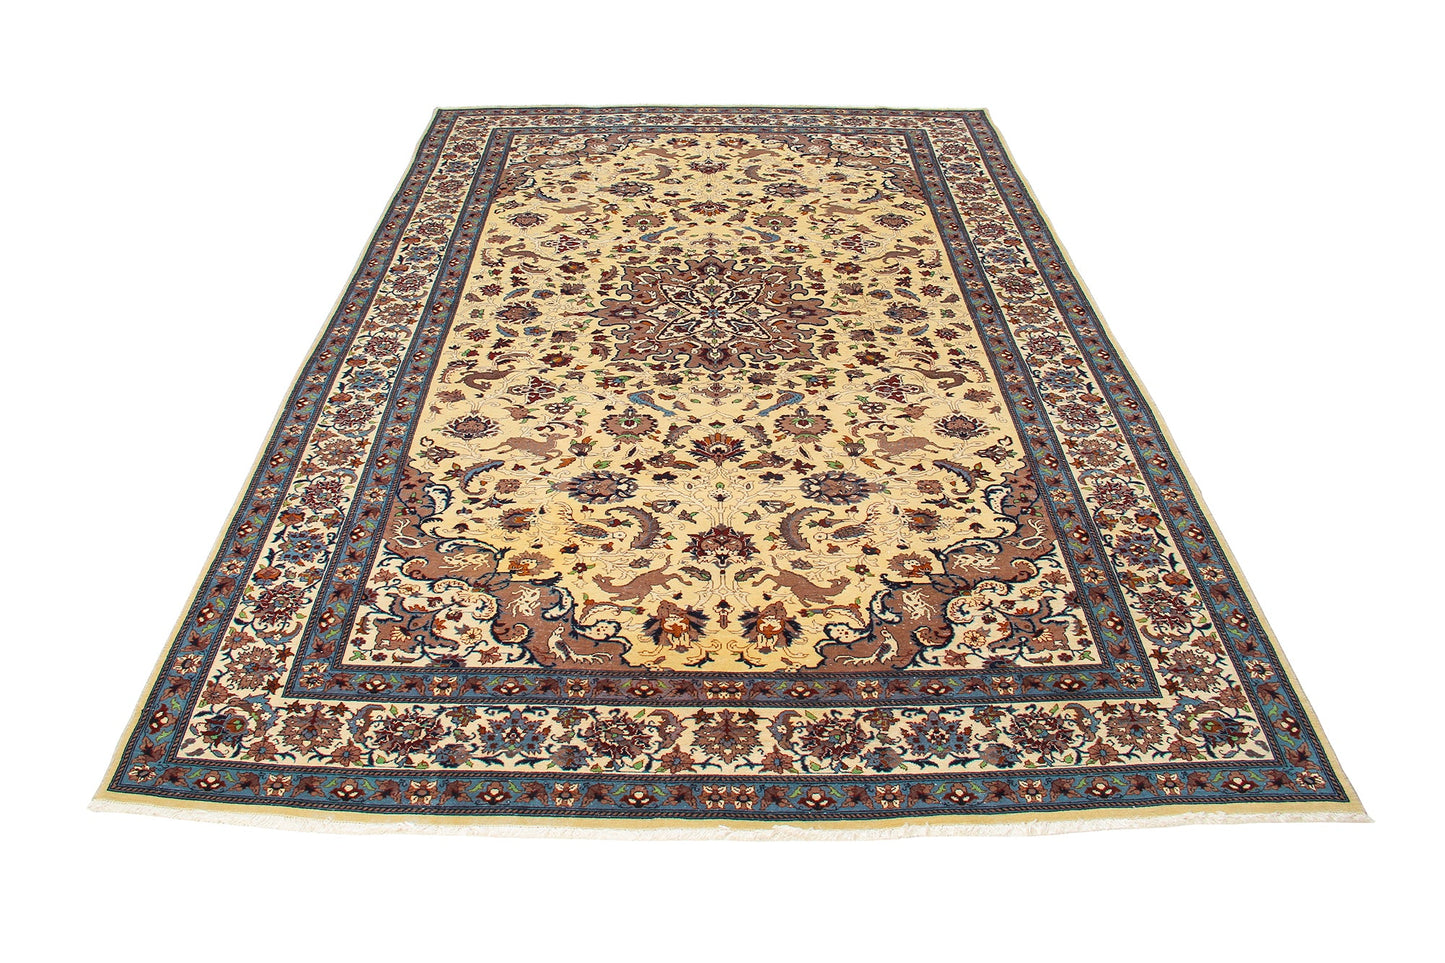 Persian Traditional Wool Hand-Knotted Nain Wool Area Rug product image #27556240818346